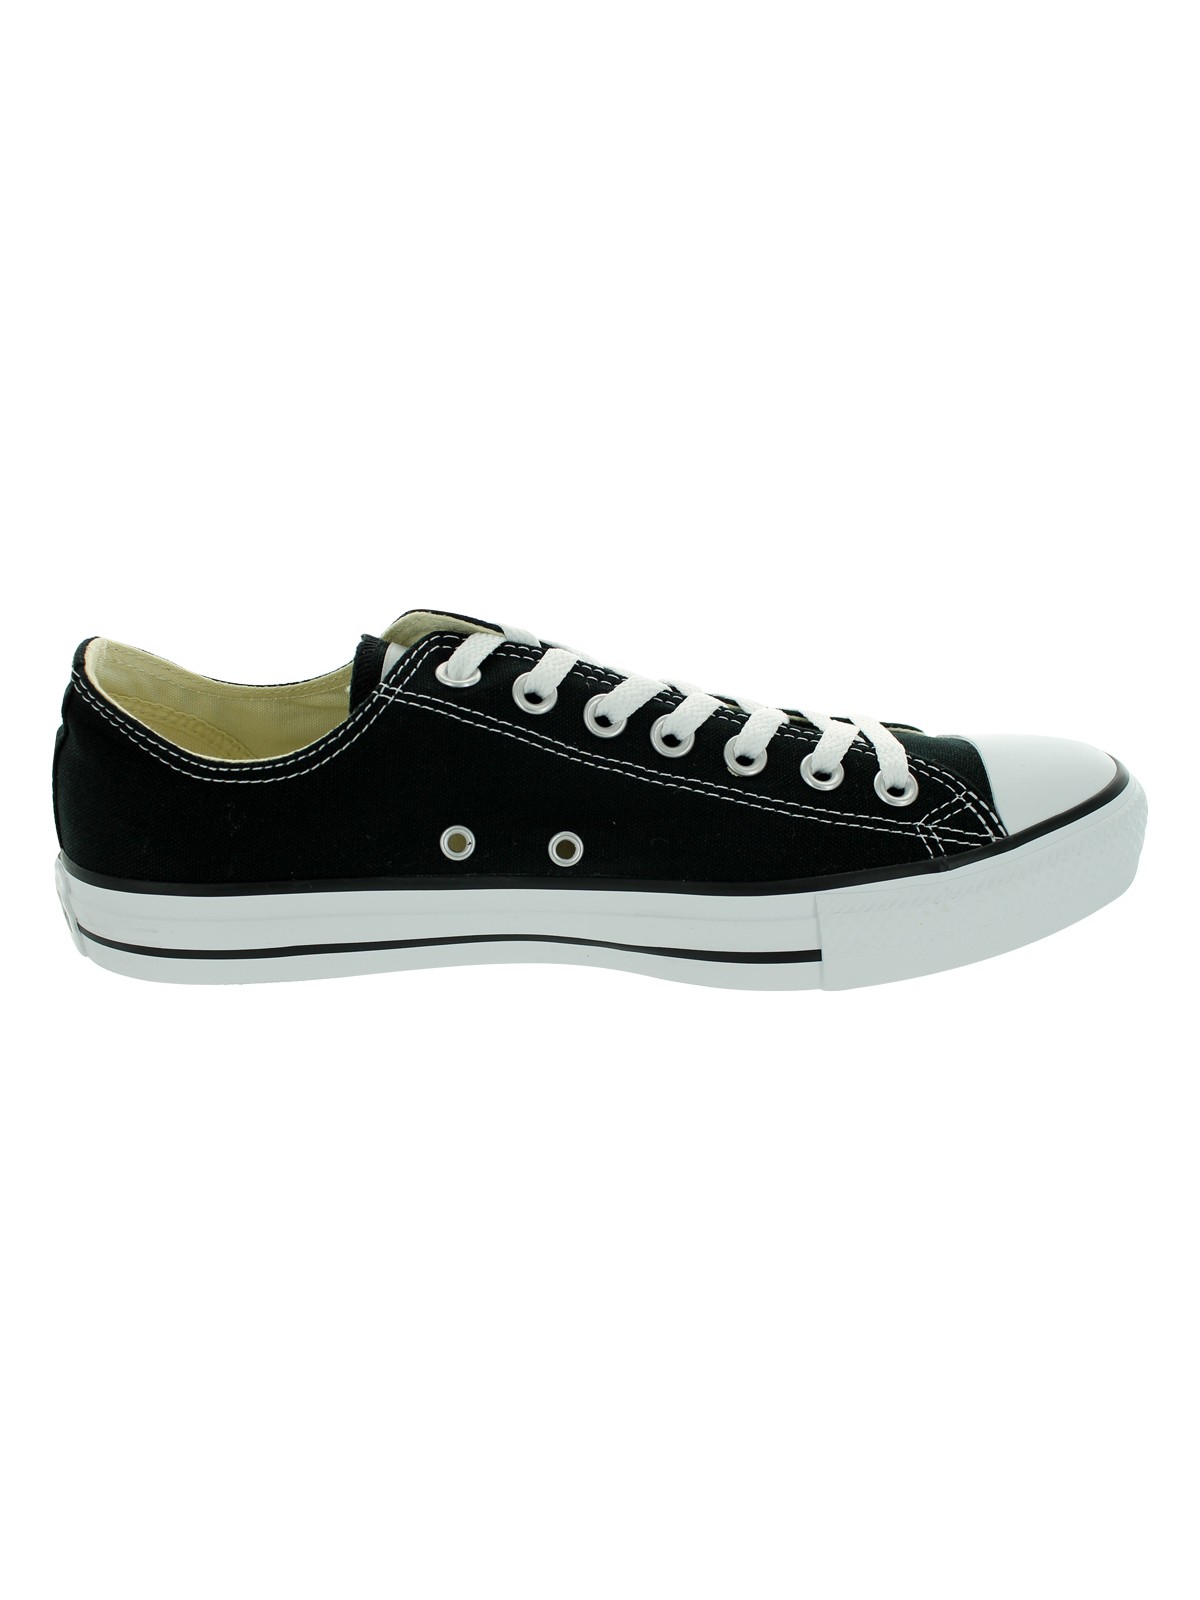 Converse Chuck Taylor All Star Low Top (International Version) Sneaker - image 2 of 5